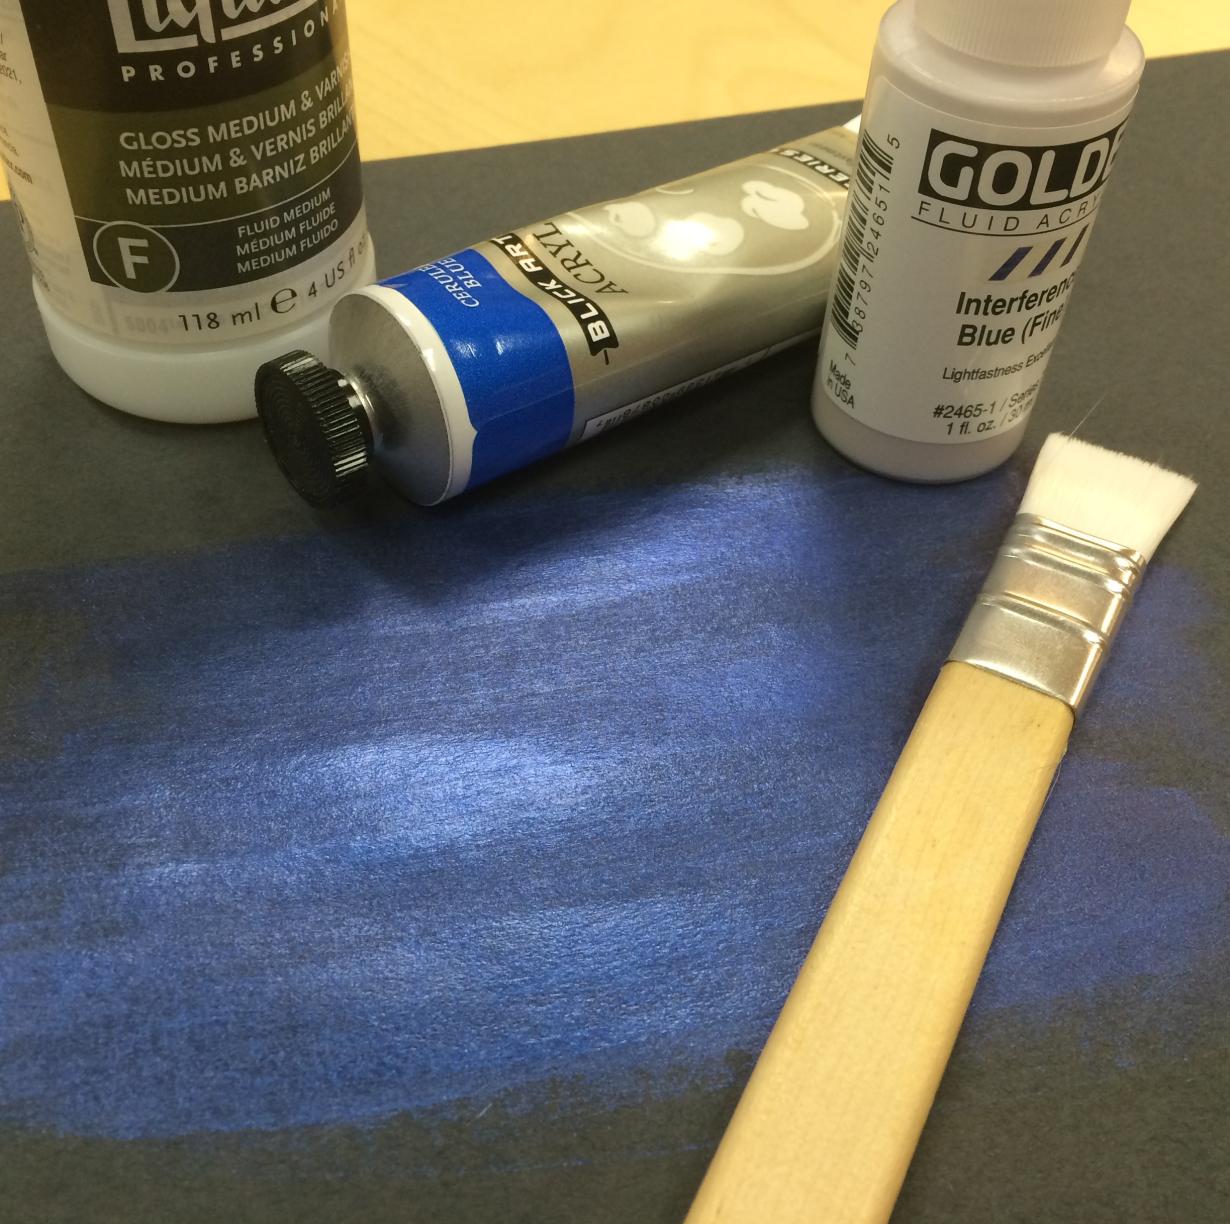 Paint tubes and a paint brush on top of paper colored with blue paint